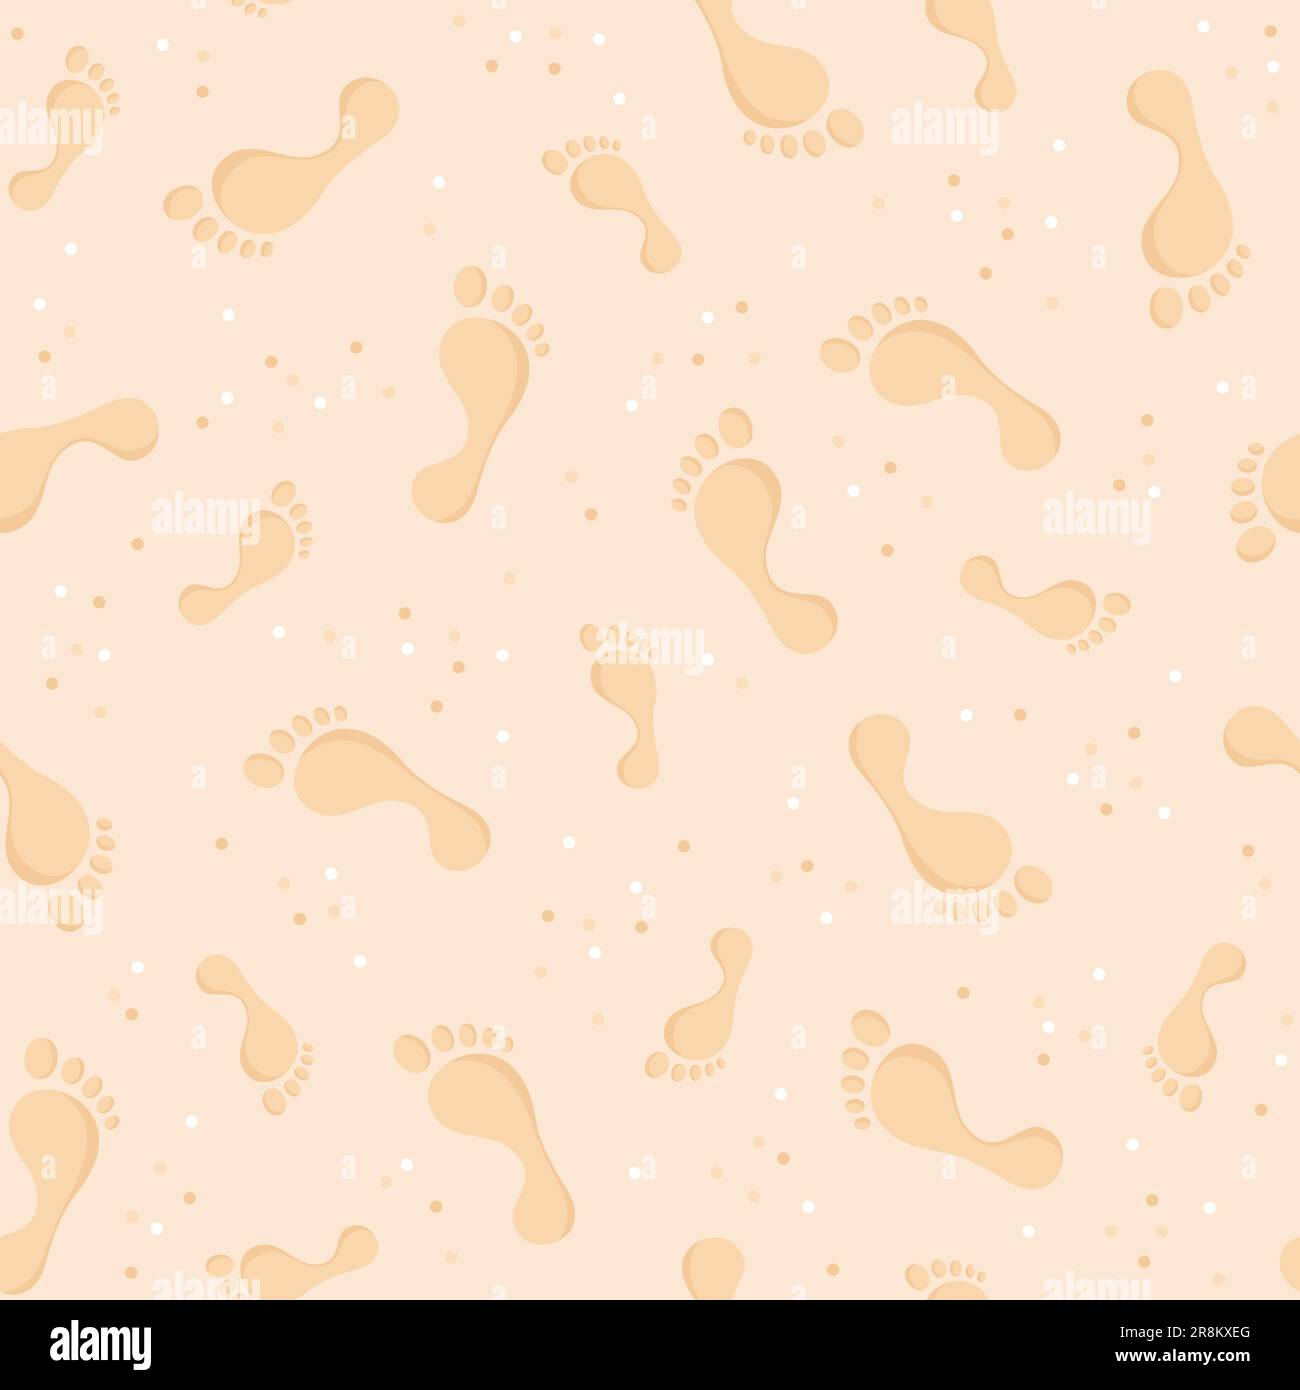 Seamless pattern of footprints on the beach sand. Vector illustration in flat style Stock Vector